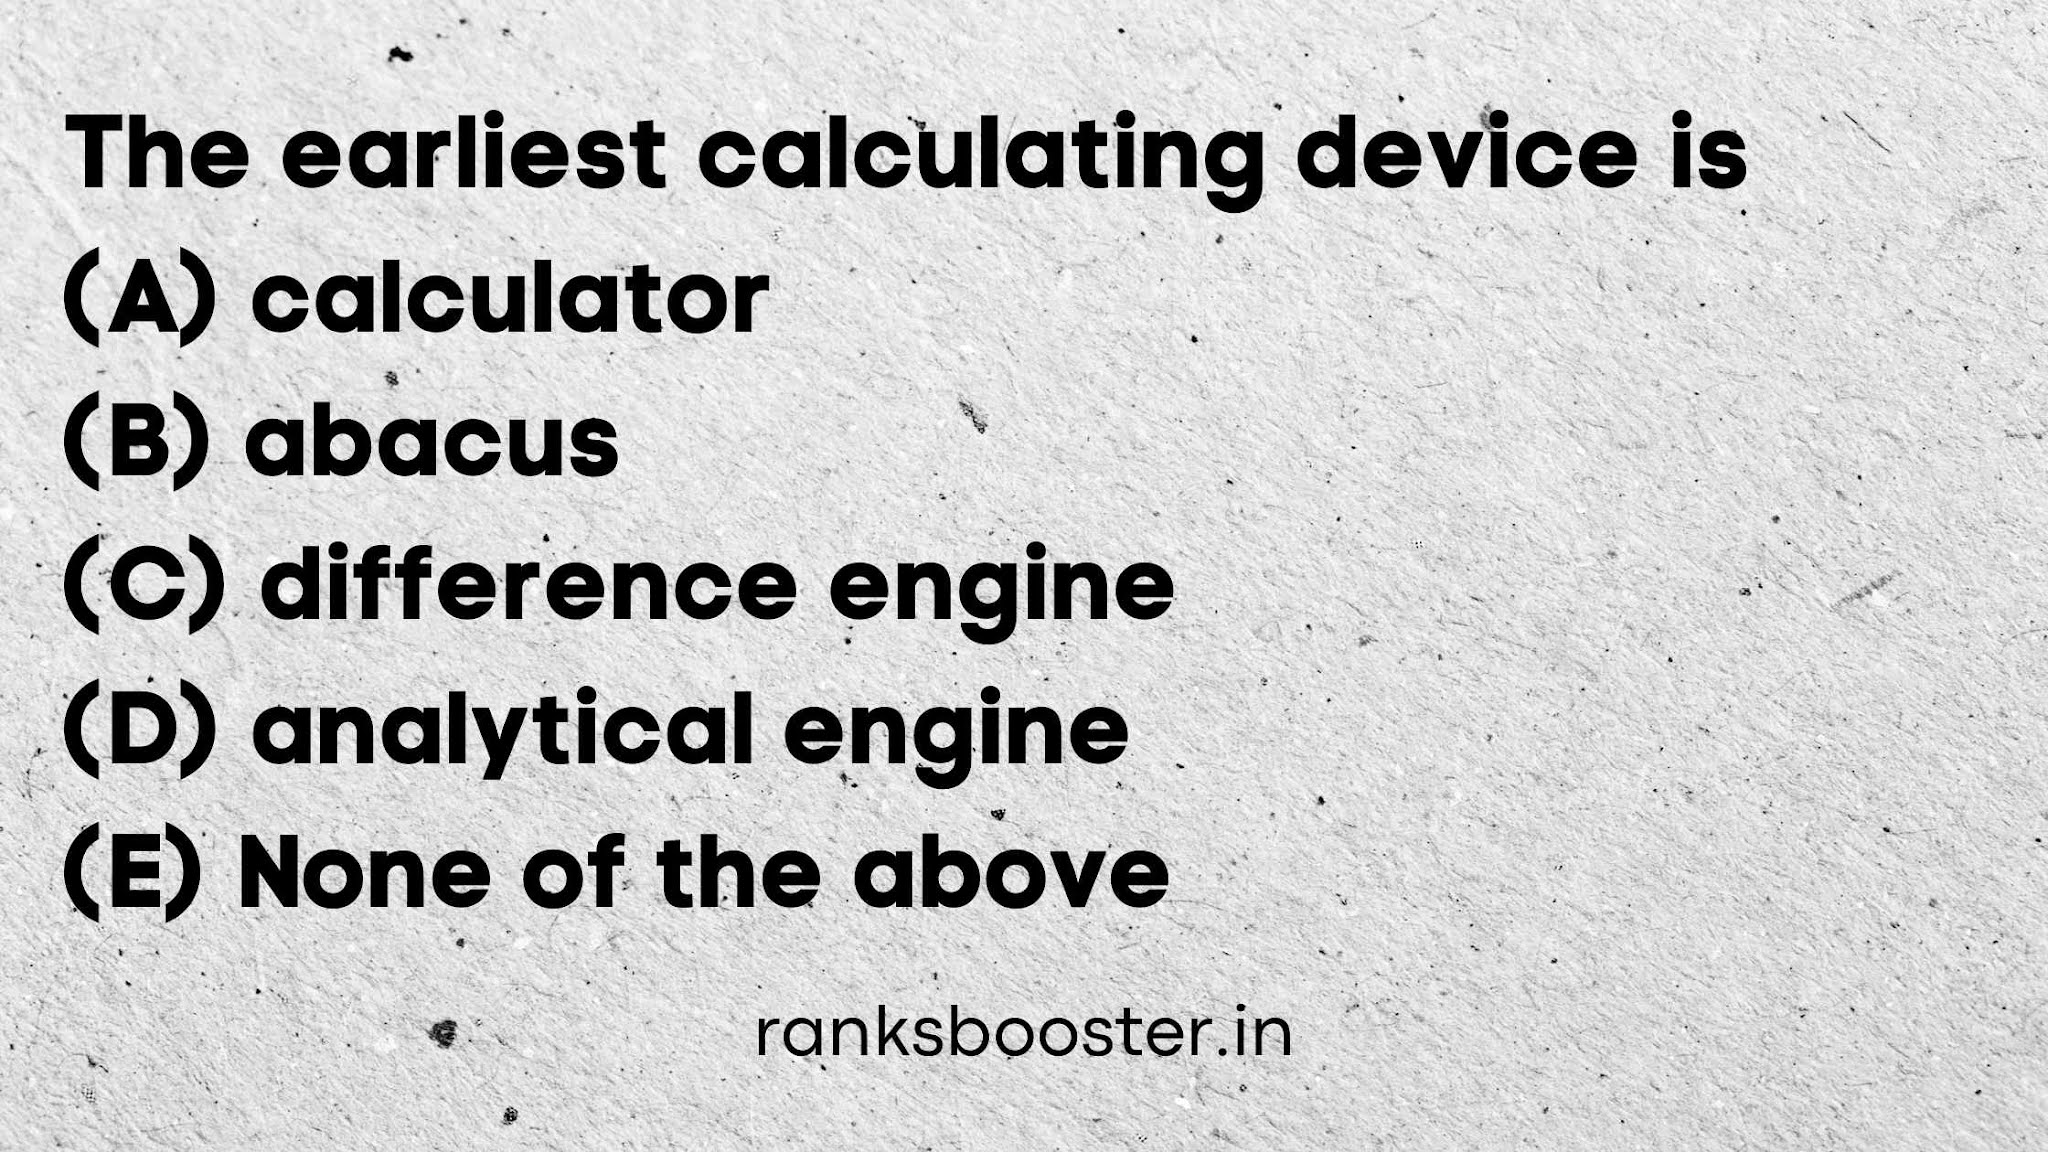 The earliest calculating device is (A) calculator (B) abacus (C) difference engine (D) analytical engine (E) None of the above